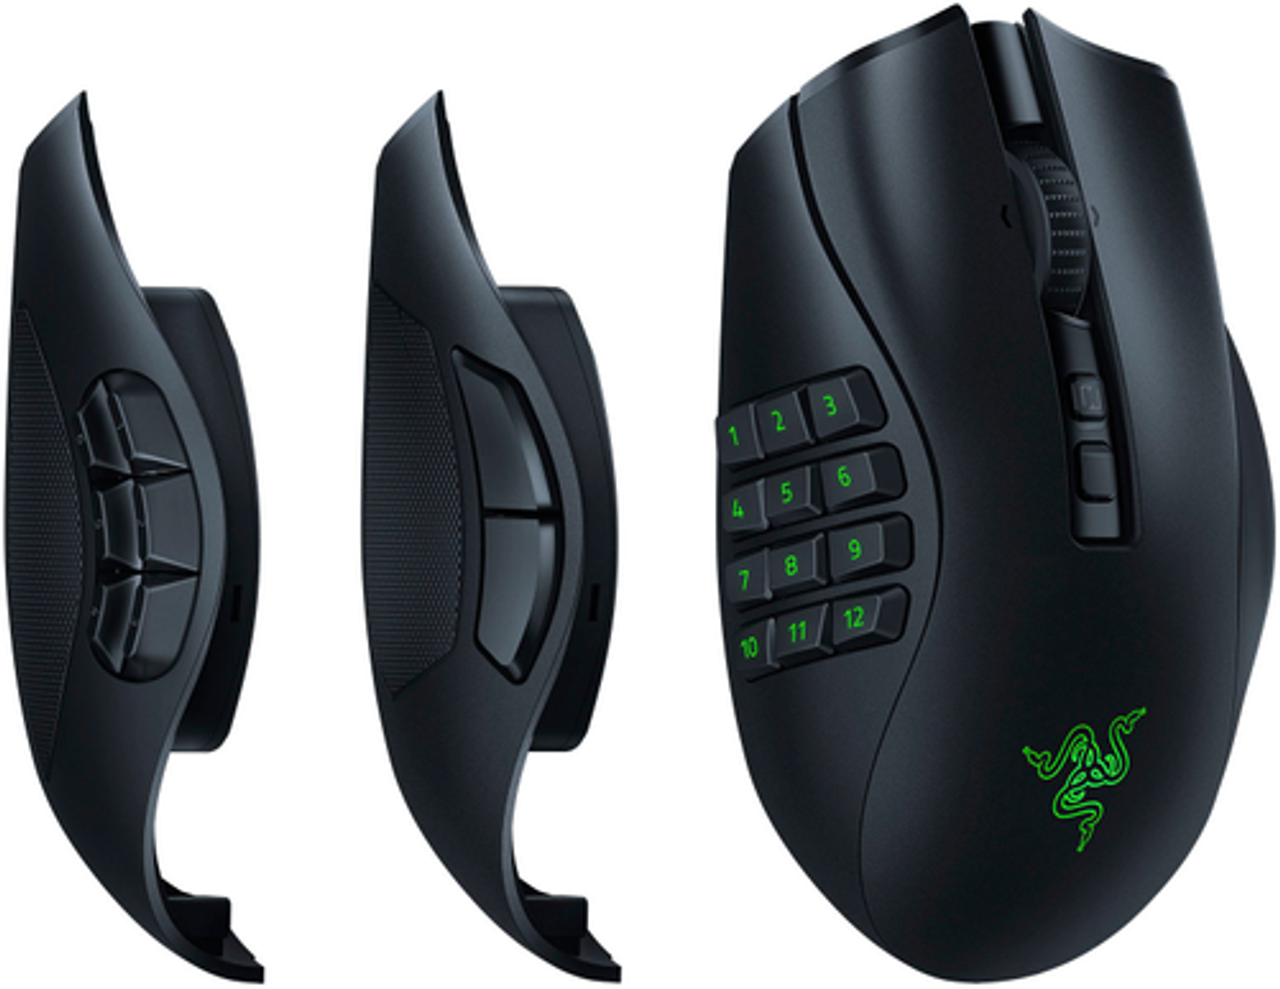 Razer - Naga V2 Pro MMO Wireless Optical Gaming Mouse with Interchangeable Side Plates in 2, 6, 12 Button Configurations - Black